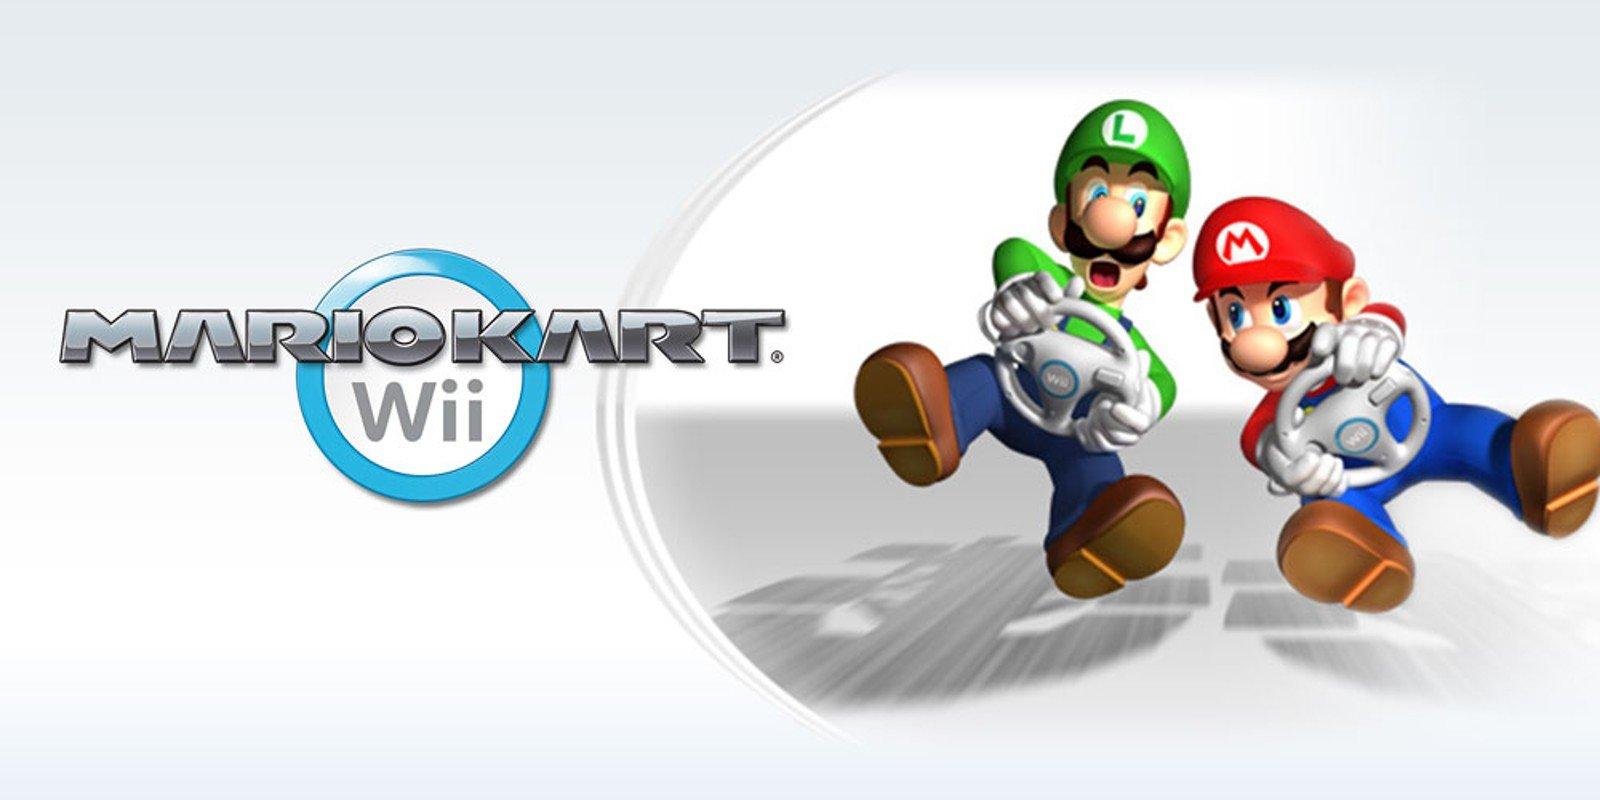 Mario Kart Wii - One Controll, 4 Players 